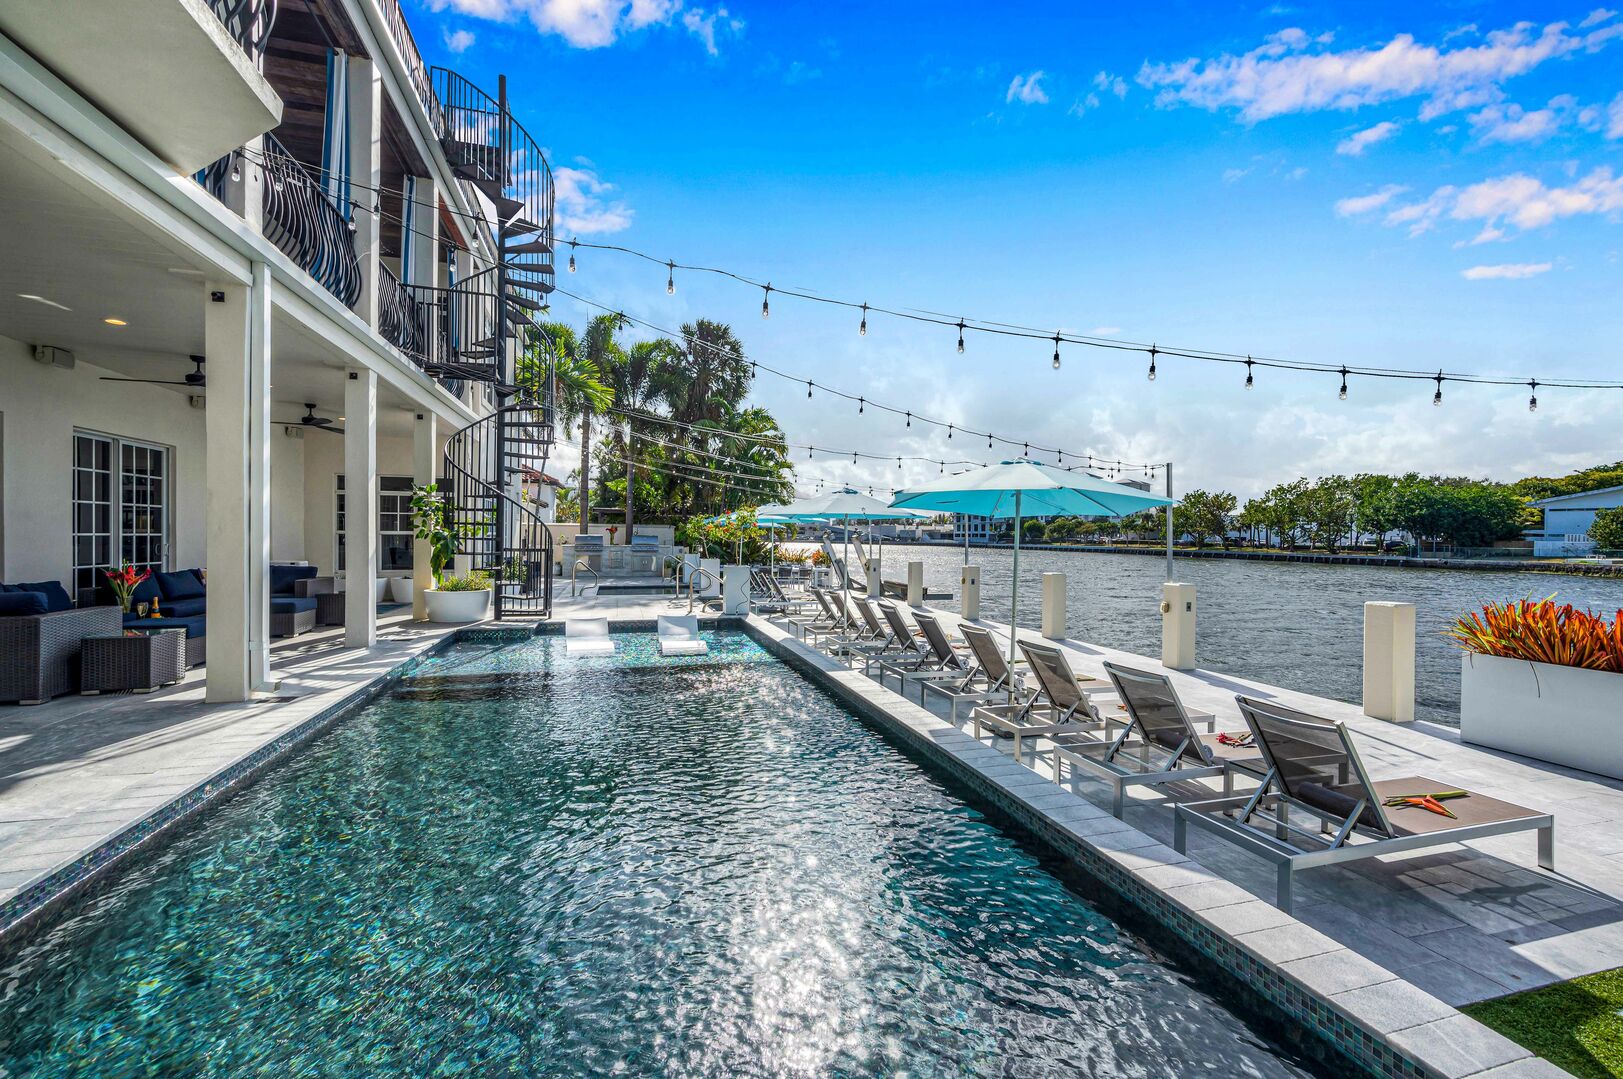 Waterfront tranquility from the heated pool and canal views with a 100 feet dock.